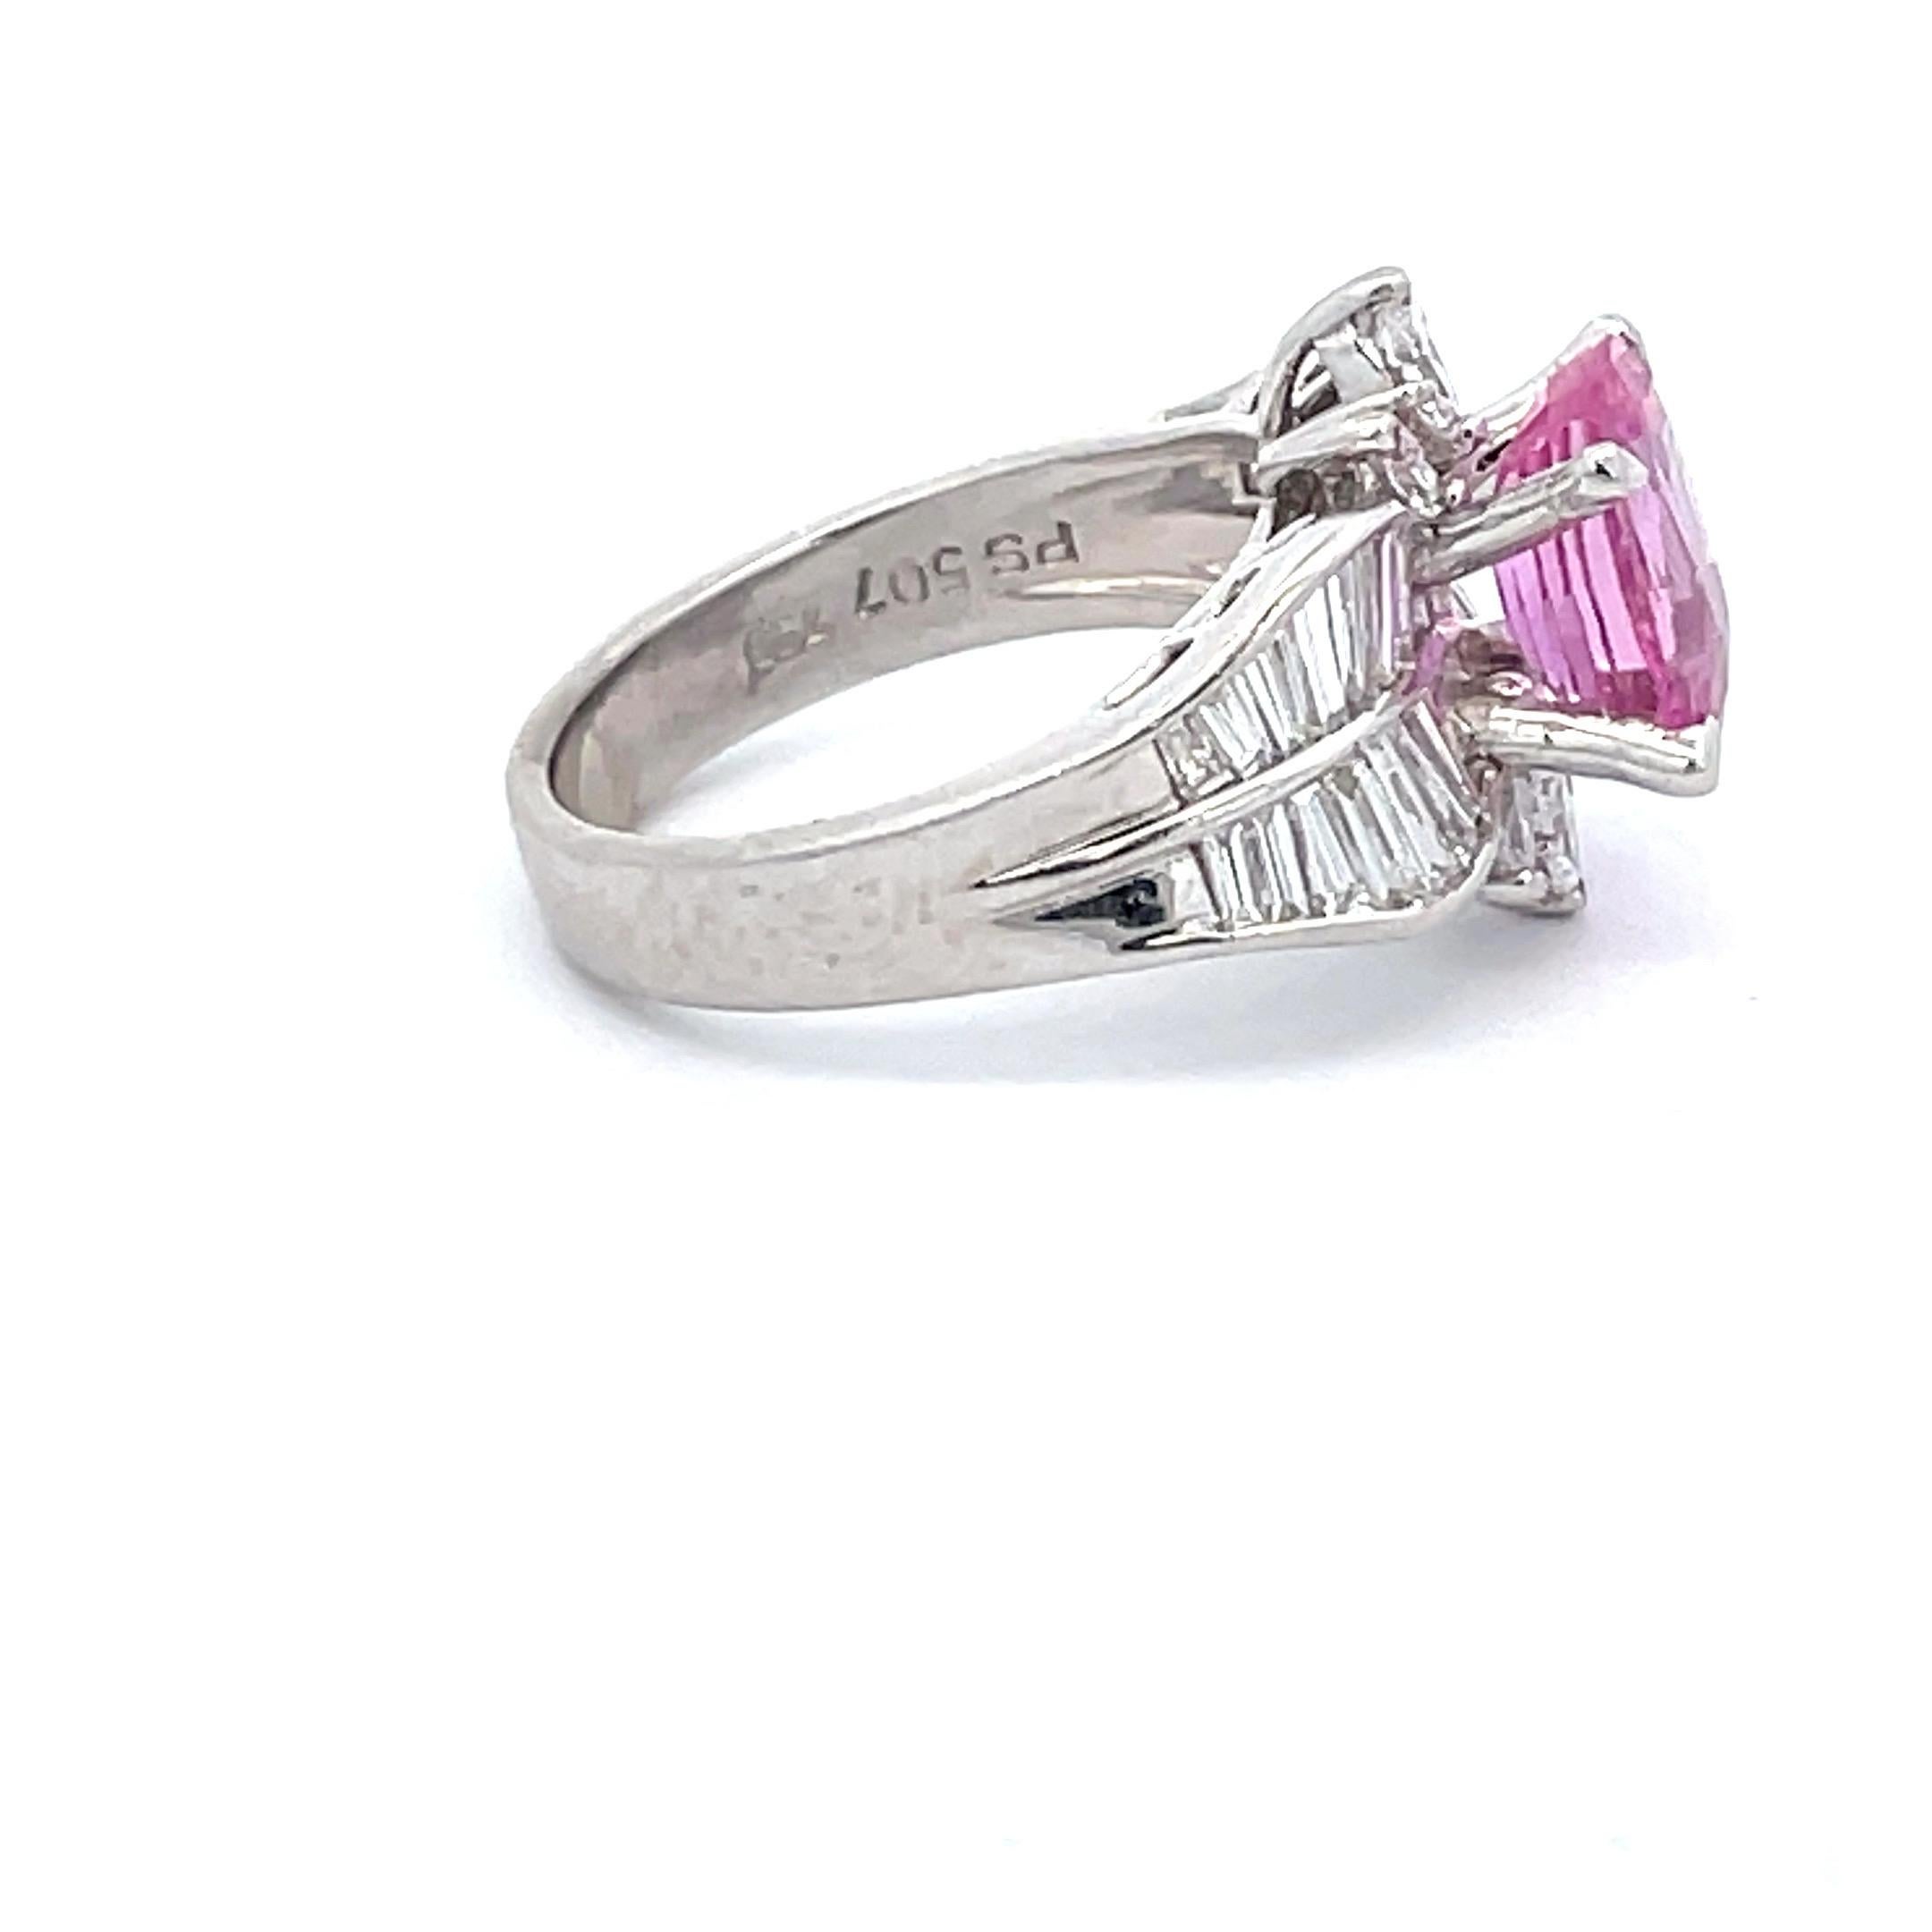 18 Karat White Gold cocktail ring featuring one elongated Cushion Cut Pink Sapphire weighing 2.93 Carats flanked with baguette & pear shape diamonds weighing approximately 2 Carats.

More Cocktail & Vintage Rings in stock.
DM for more pictures &